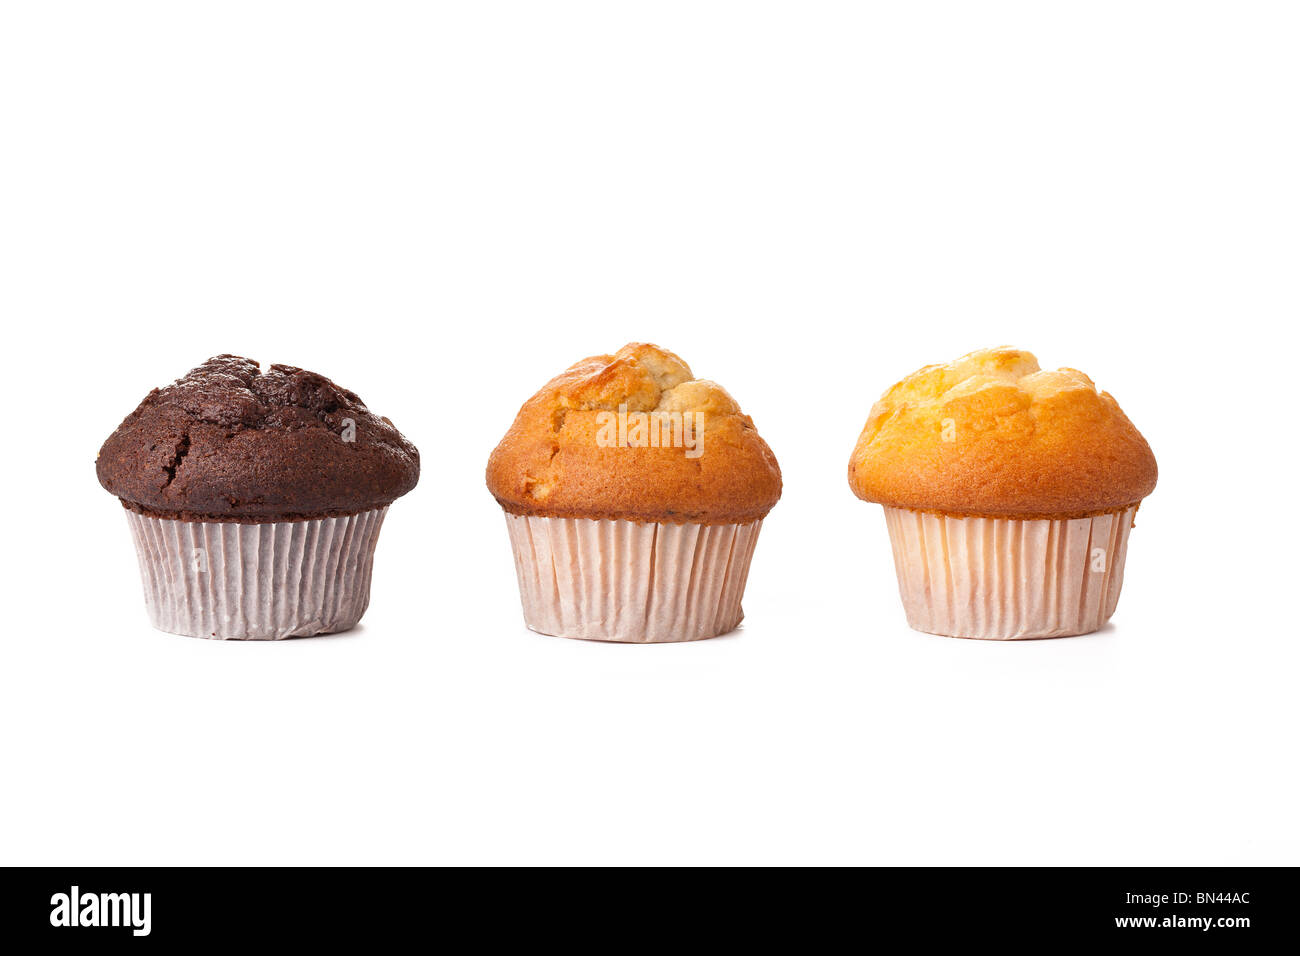 sweet muffins on white background Stock Photo